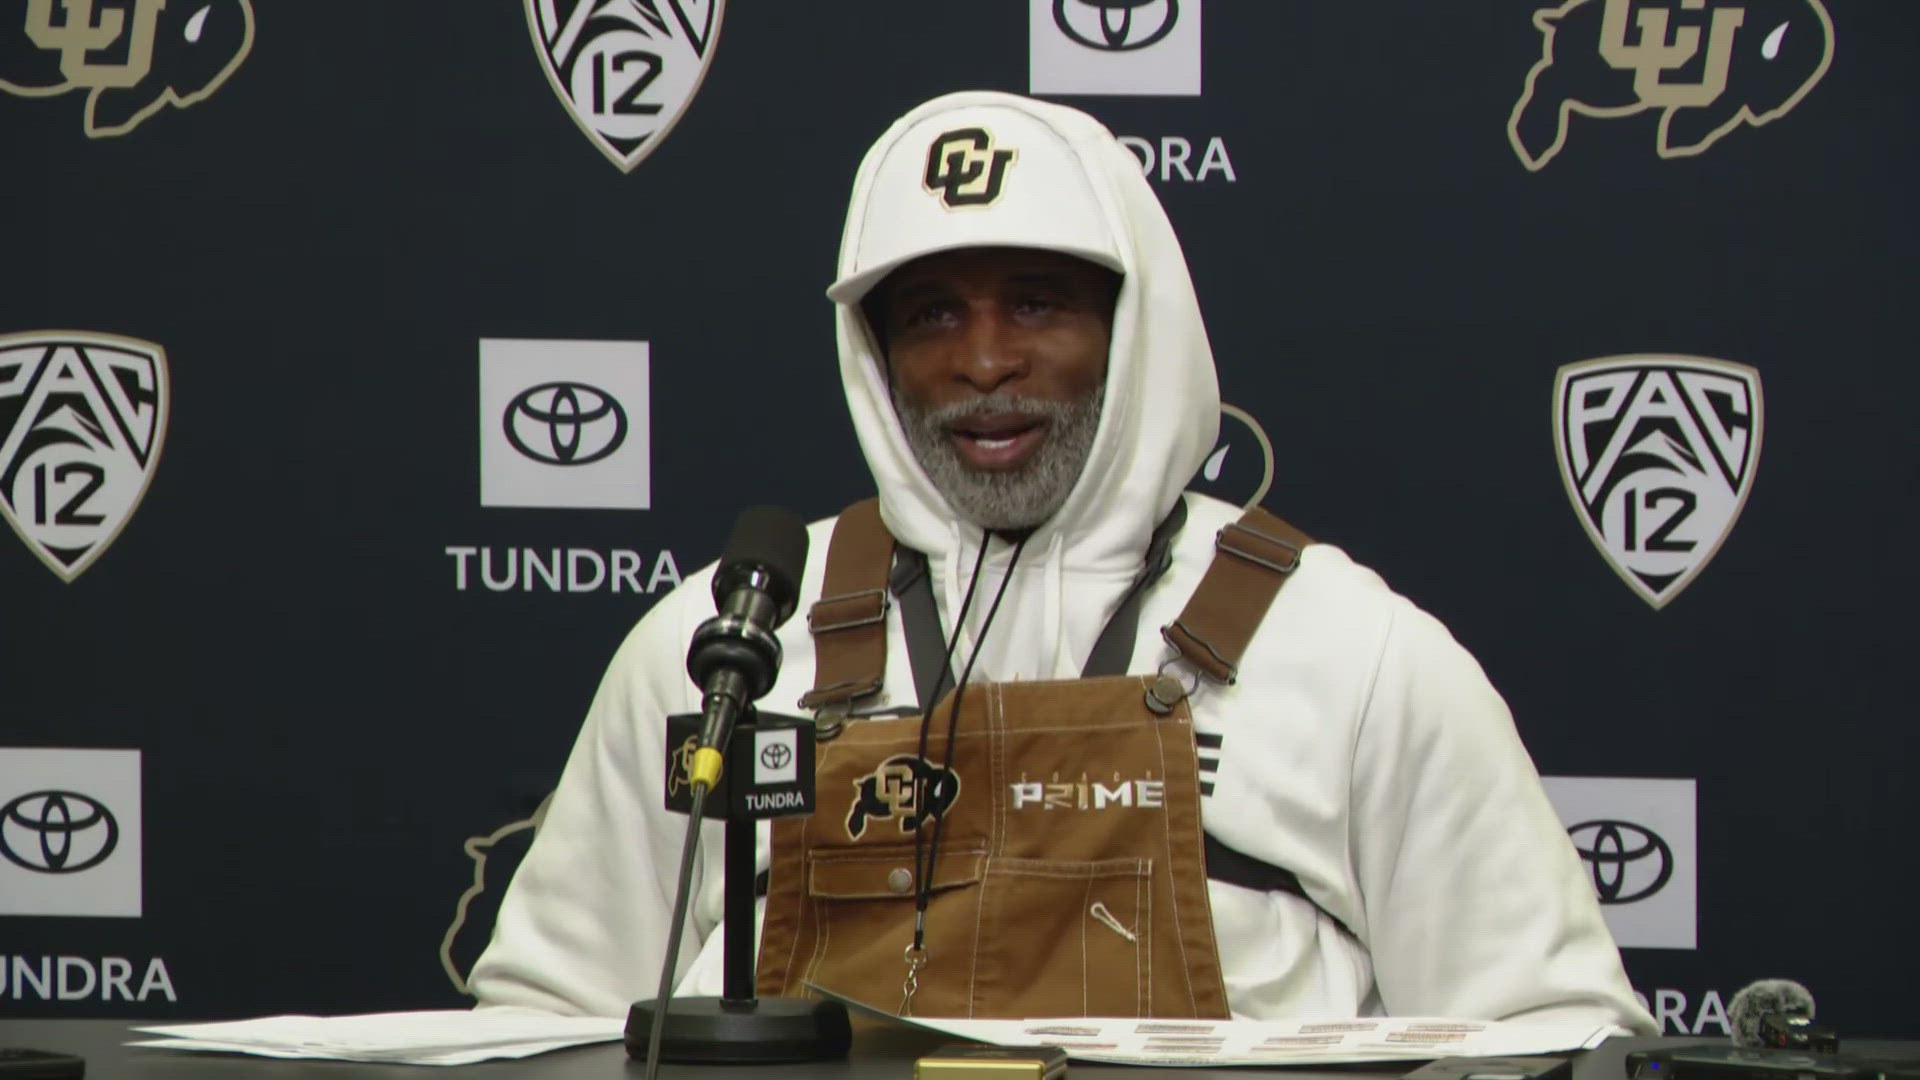 University of Colorado head football coach Deion Sanders held a news conference Thursday where he answered some questions about the NCAA transfer portal.